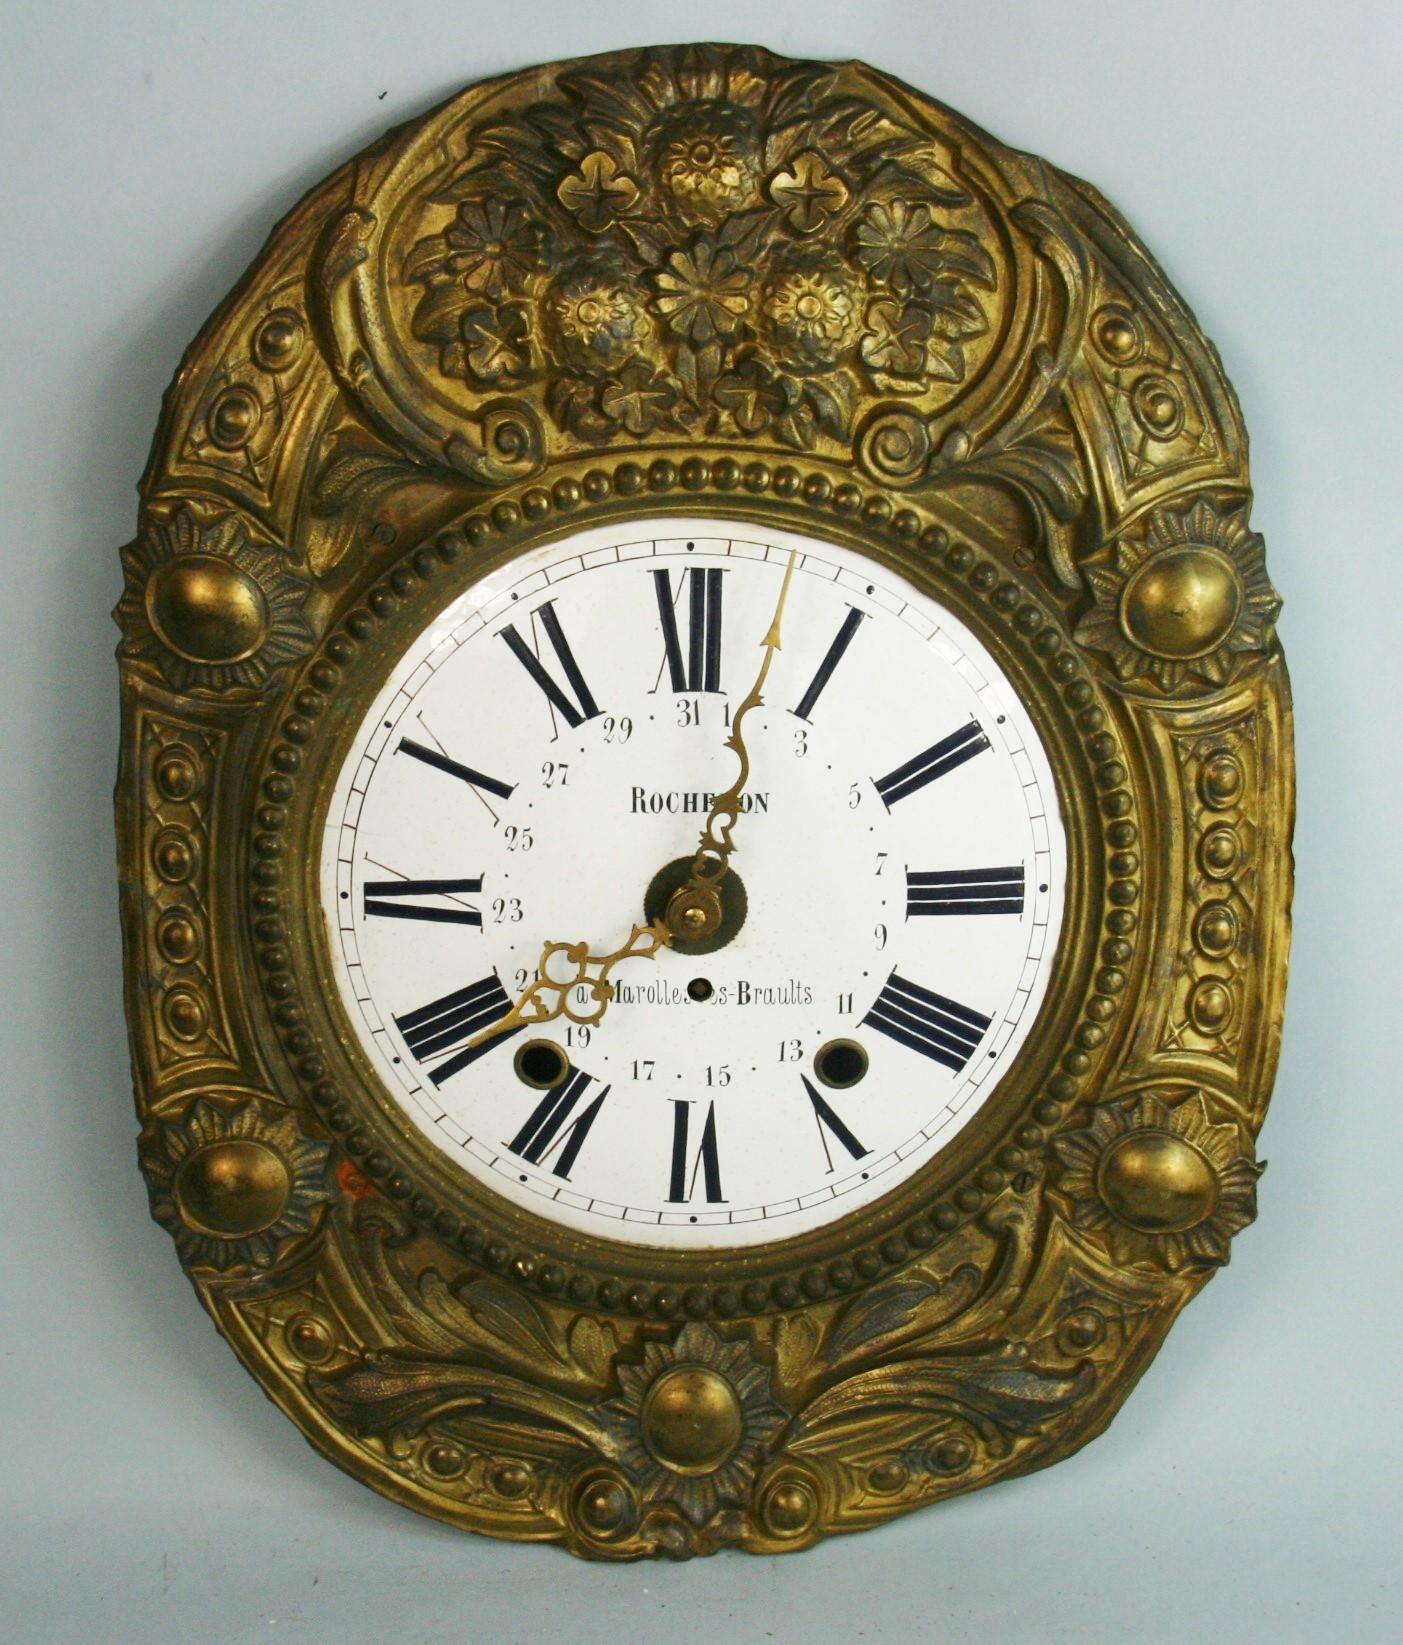 3-676 vintage French enamel and brass clock face
Has matching lower brass piece see 3-677